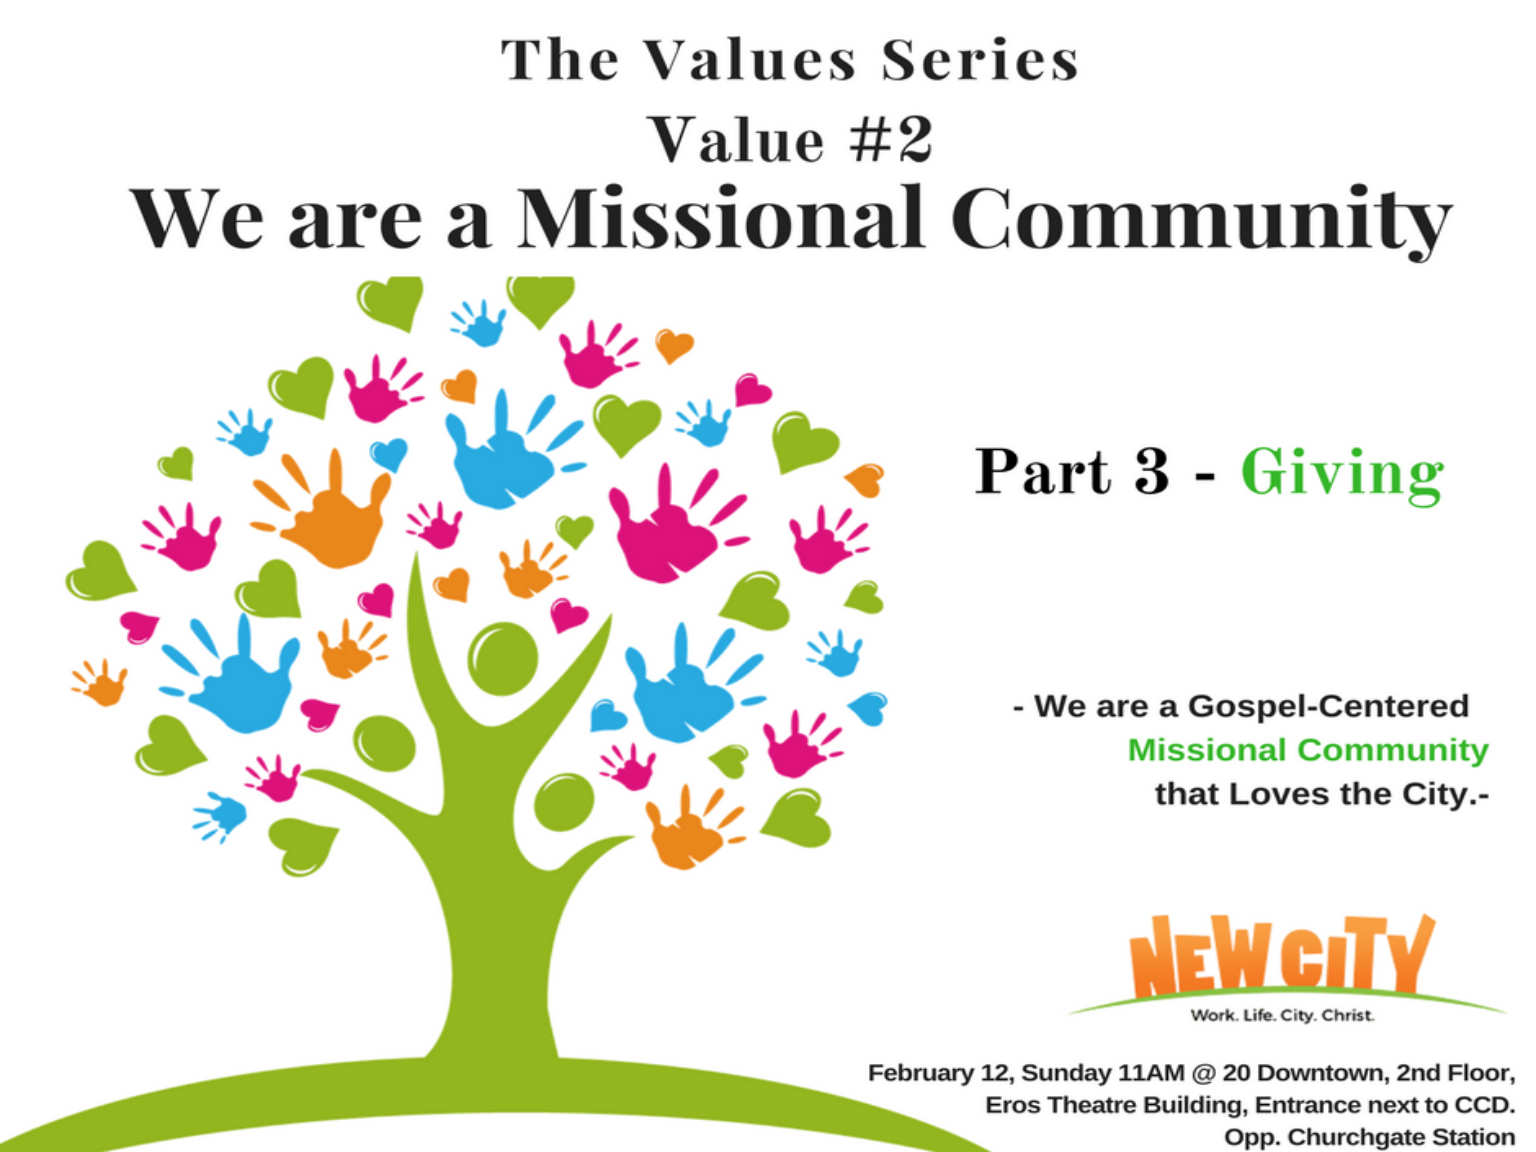 We are Missional Community (Part 3) Image